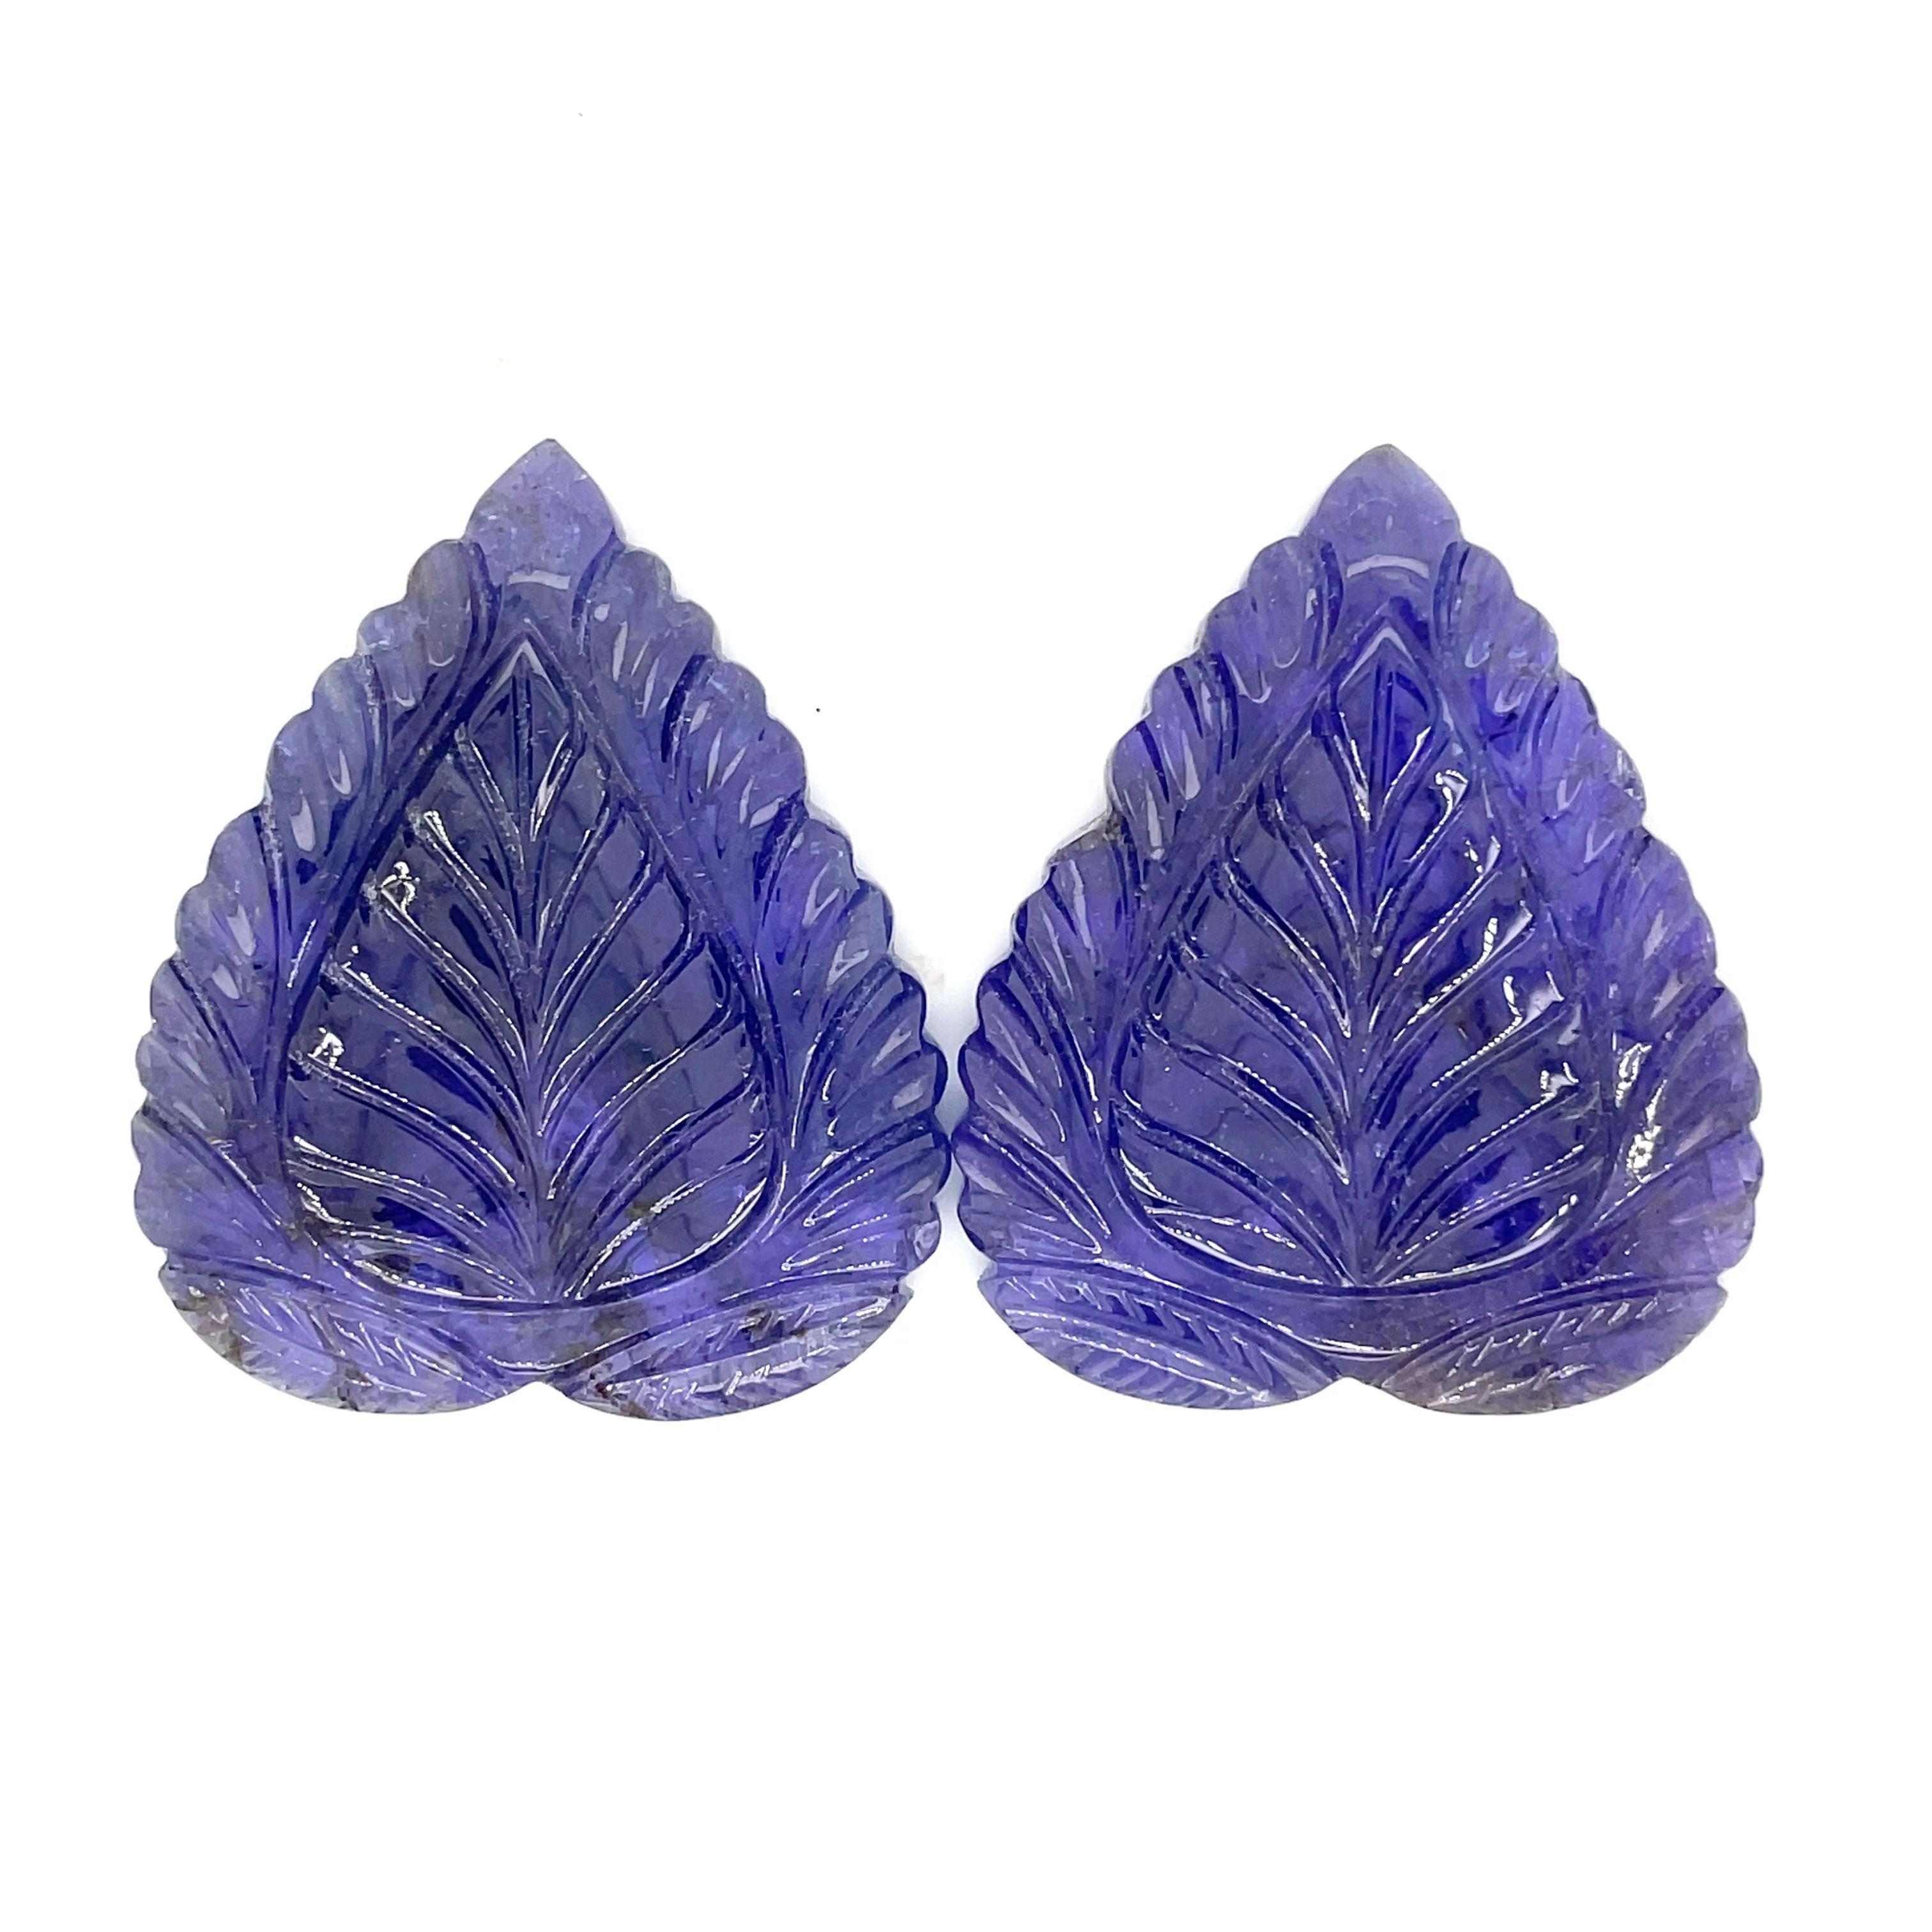 This exquisite duo of Tanzanite gemstones weighs a stunning 164.44 cts.

They are carved to resemble delicate leaves and are a true testament to nature's artistry and unparalleled beauty, making them a must-have addition to any jewelry